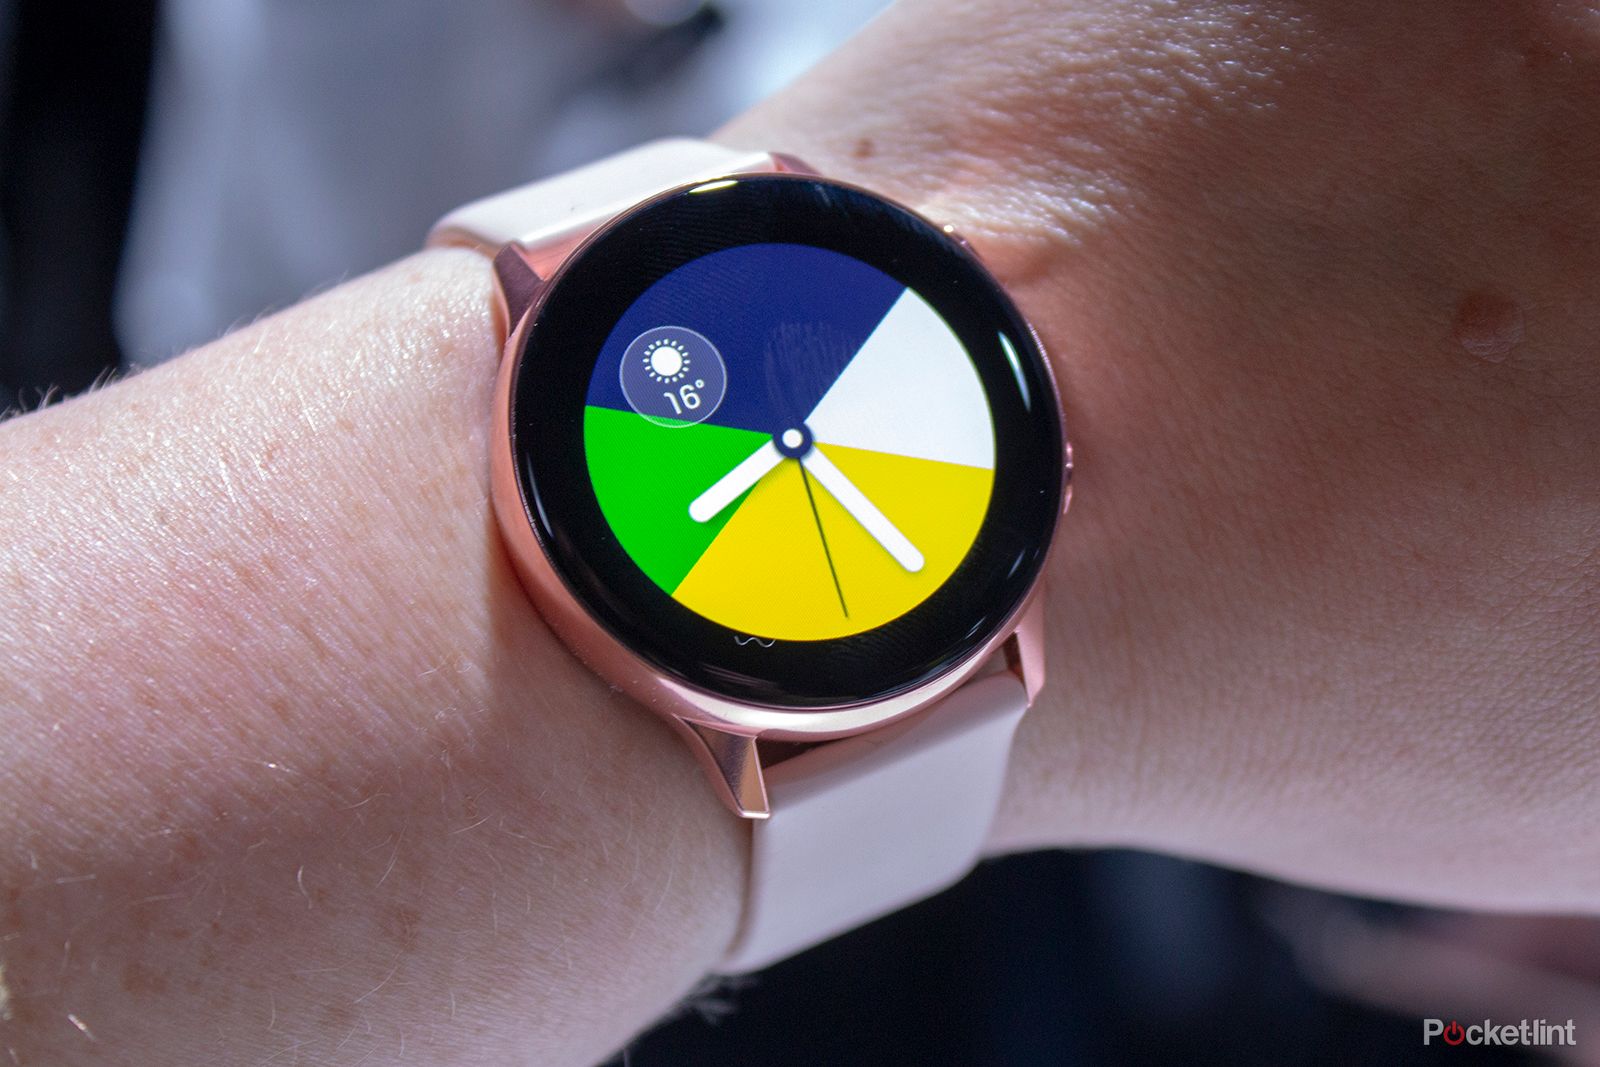 Samsung Galaxy Watch Active 2 Design And Specs Revealed By Fcc Leak image 1